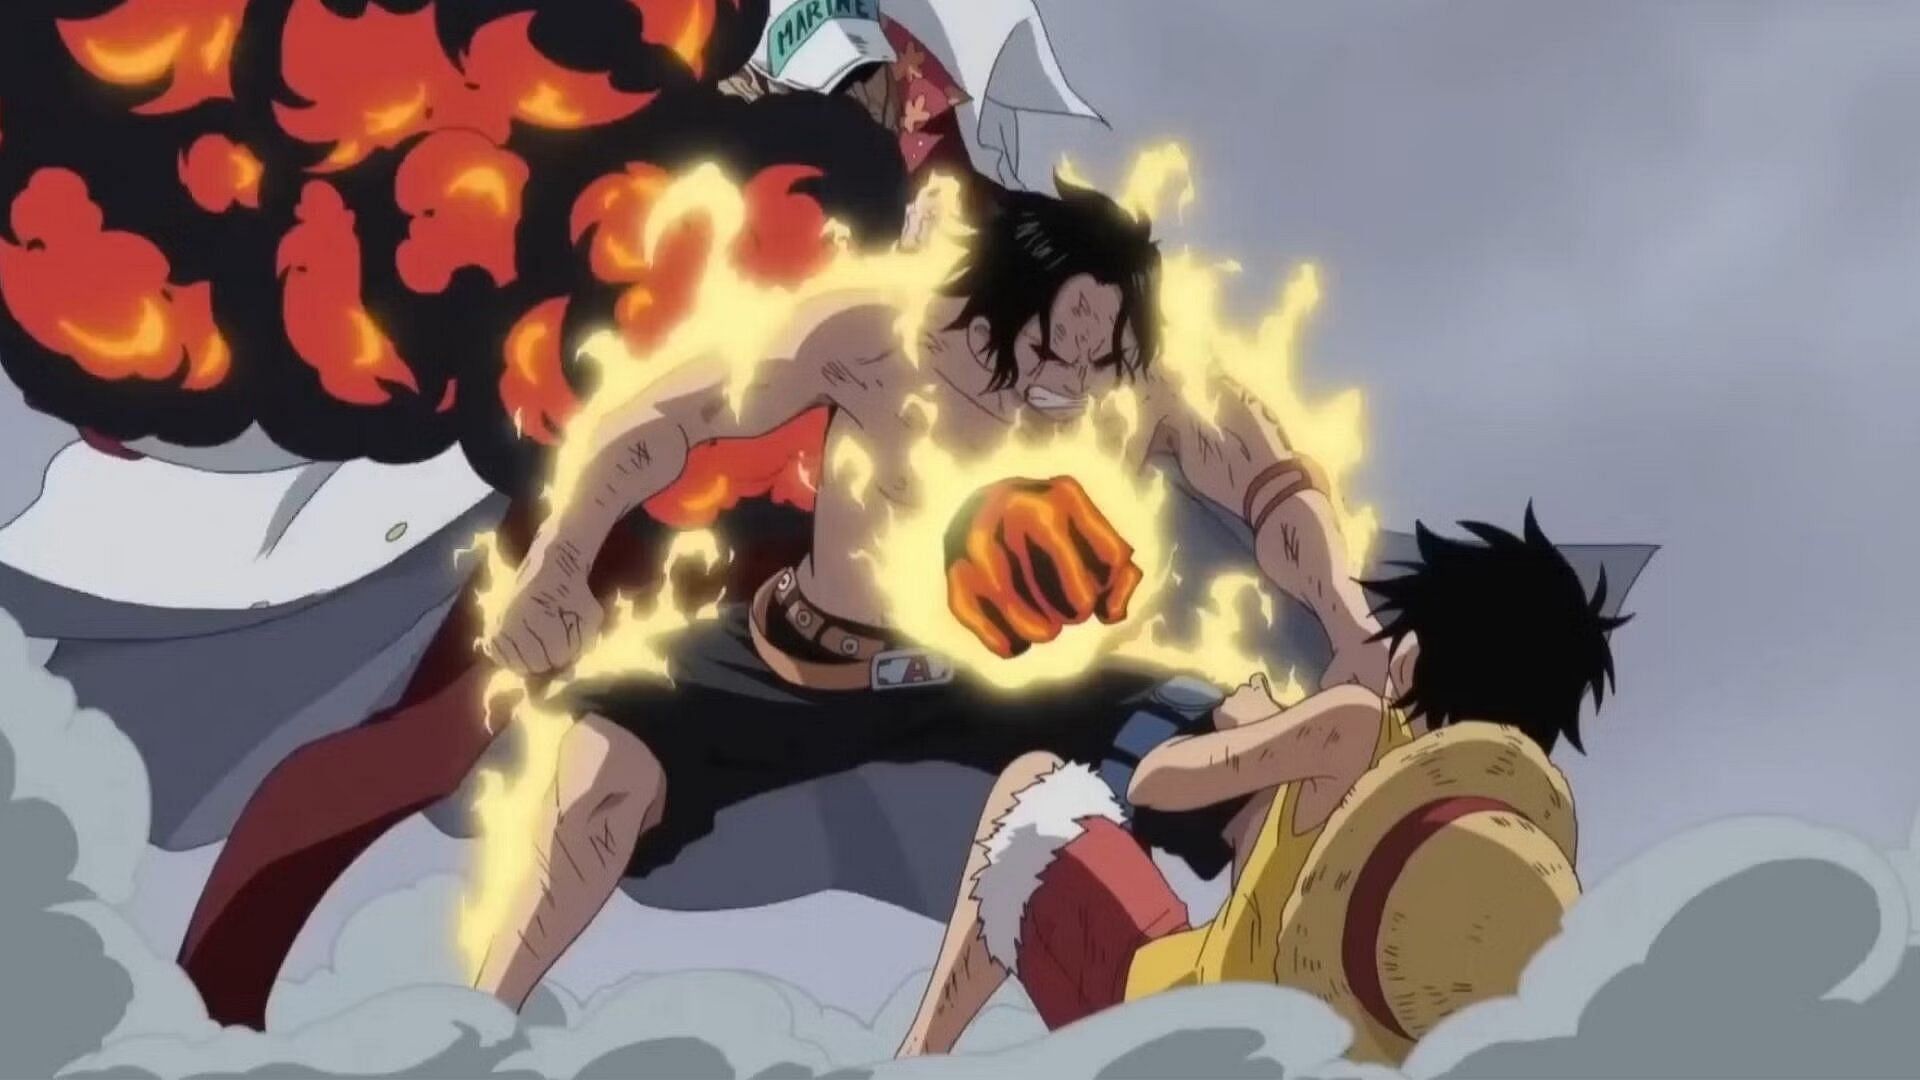 Ace dying at the hands of Akainu in the anime (Image via Toei Animation).